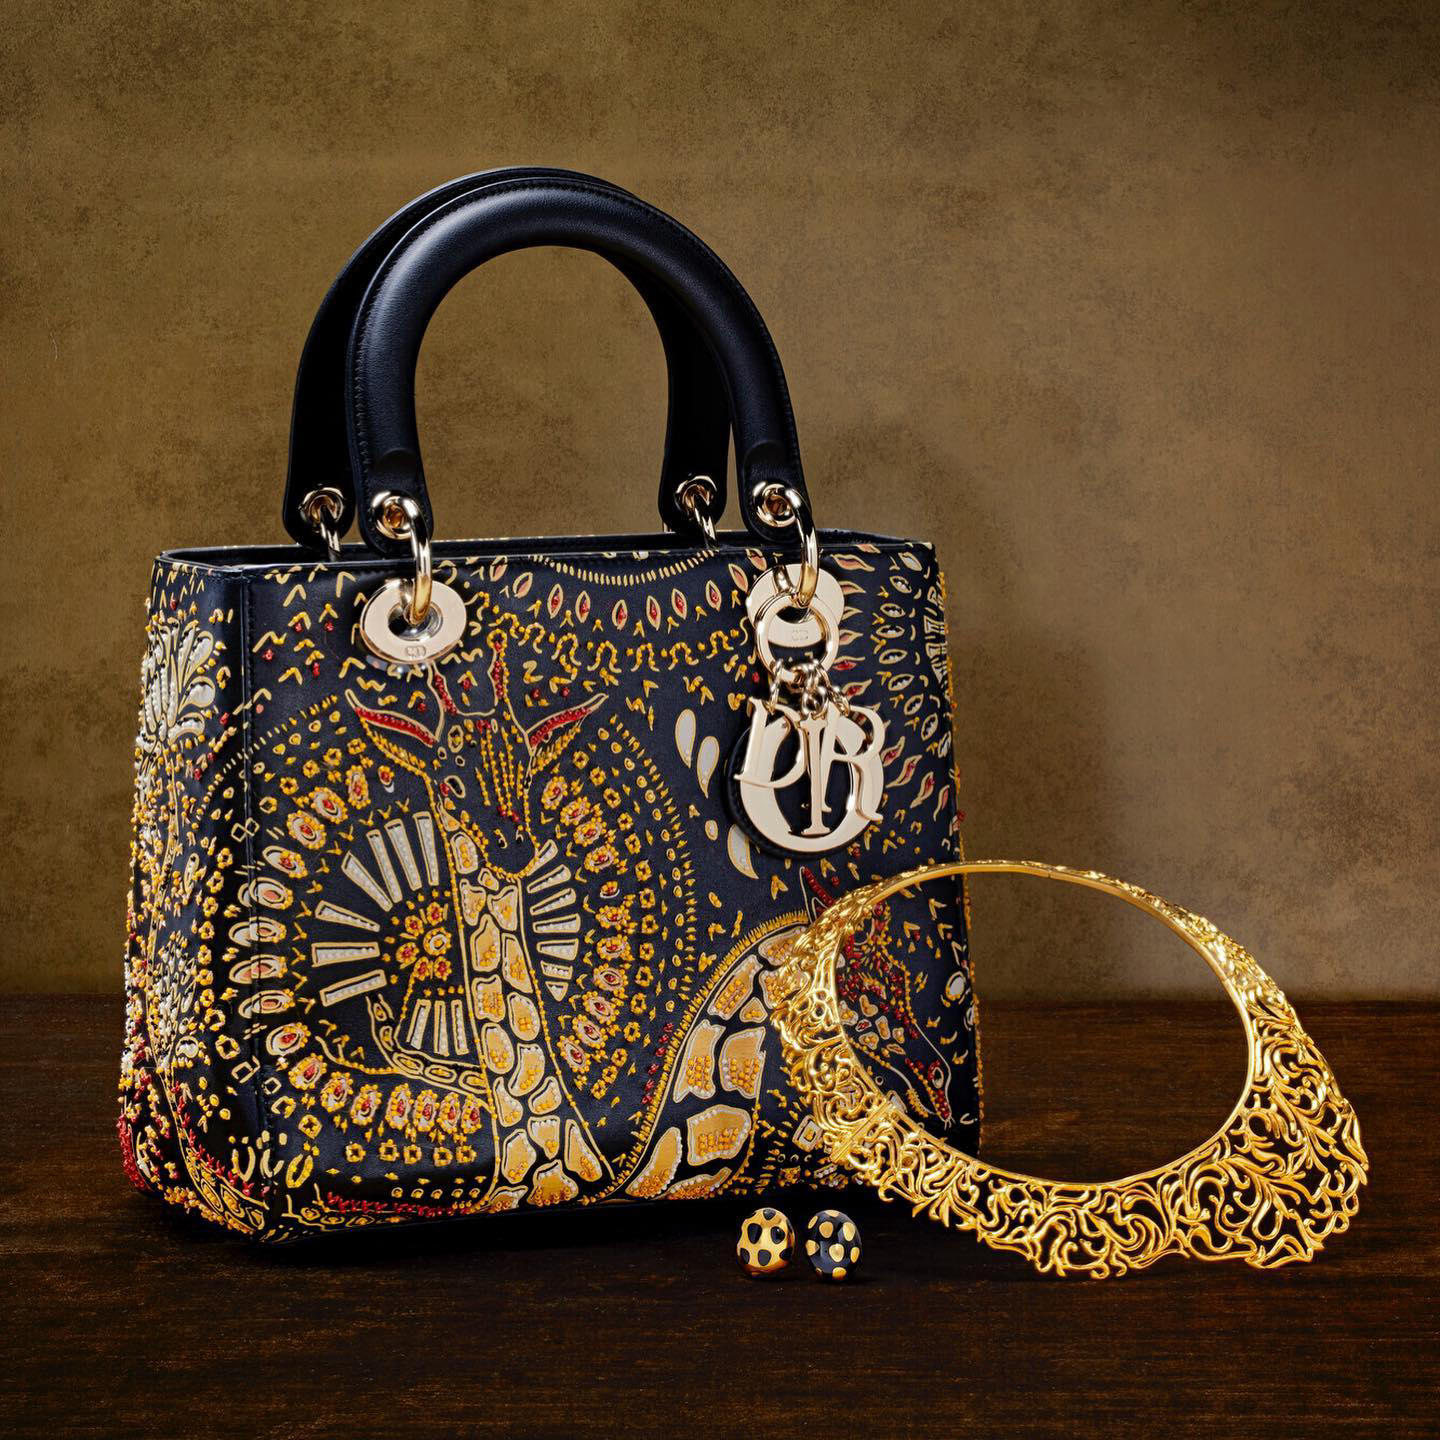 Christie's Handbags - Christie’s is proud to present “The Ann